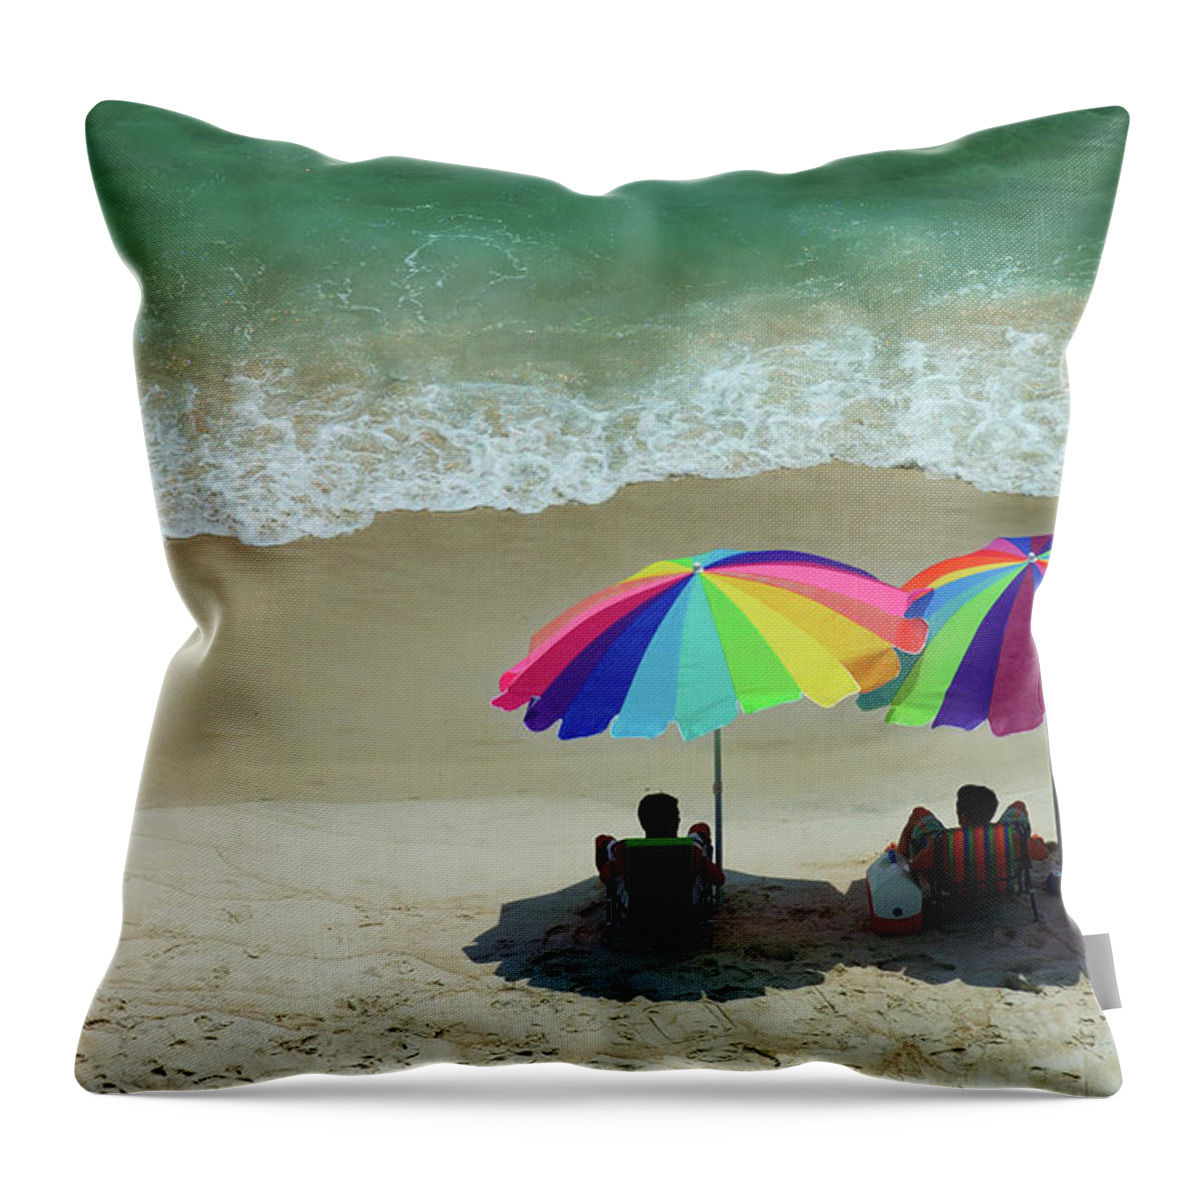 People Throw Pillow featuring the photograph Pair Of Beach Umbrellas by Dlewis33